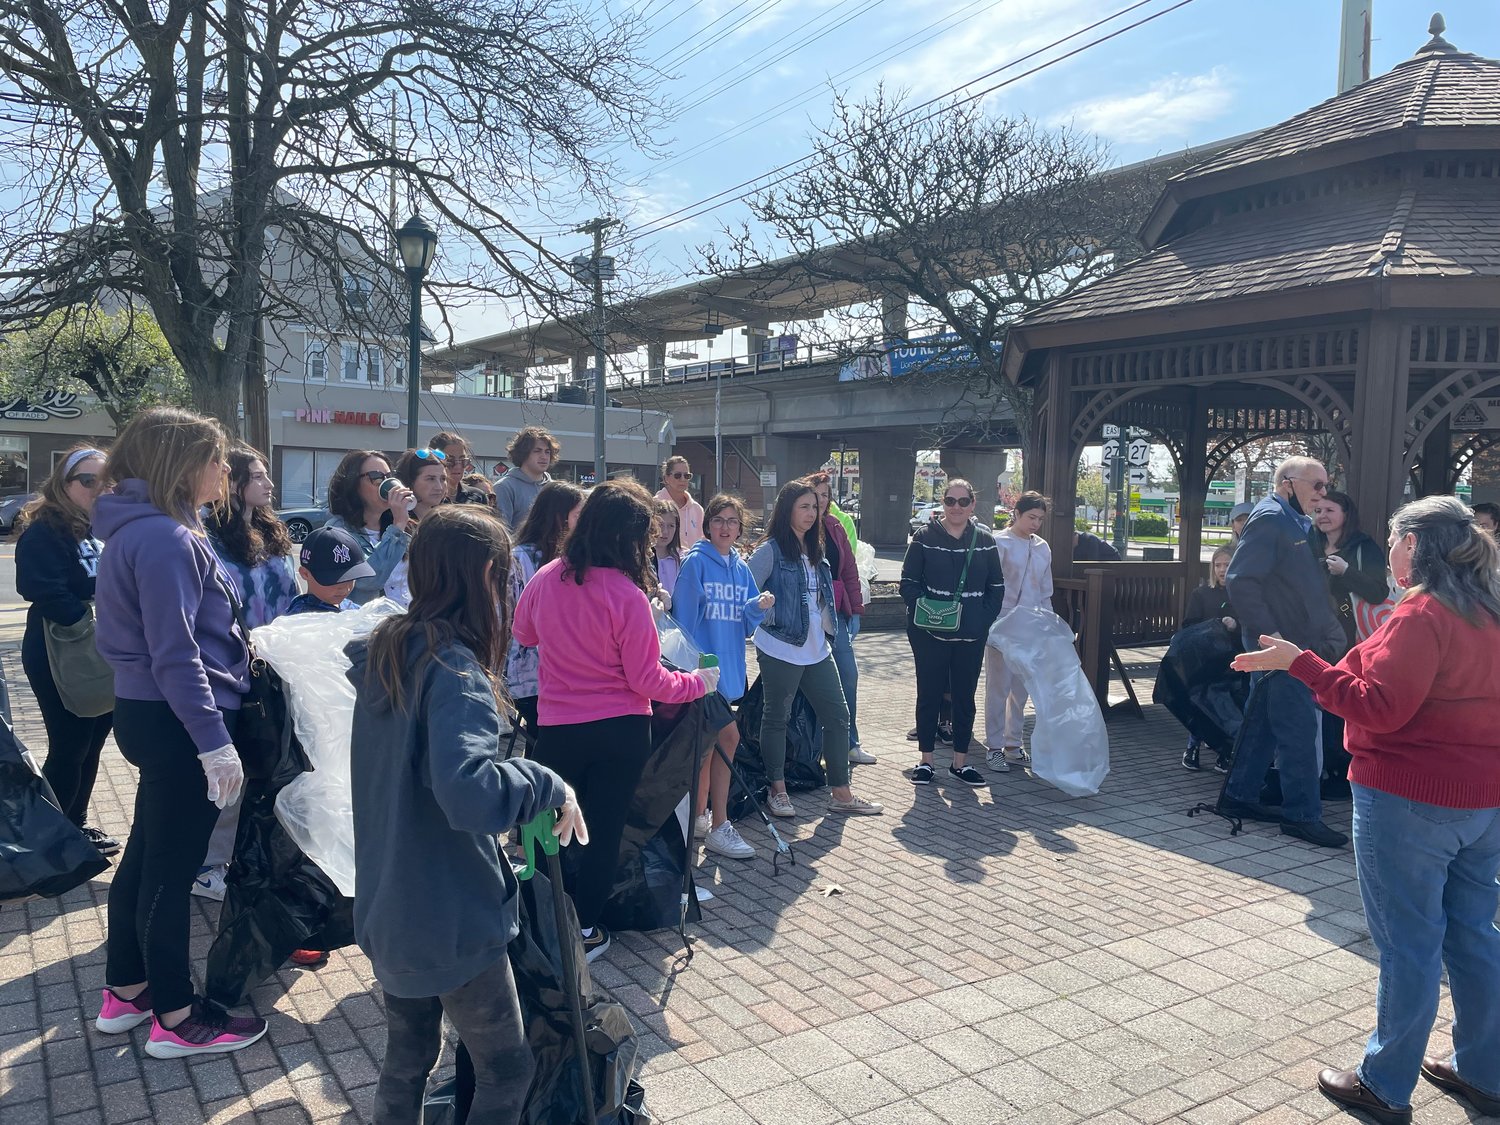 Troves of volunteers gathered at the Merrick gazebo on Sunday, eager to participate in the South Merrick Community and Civic Association’s annual “Spring Clean Sweep.”